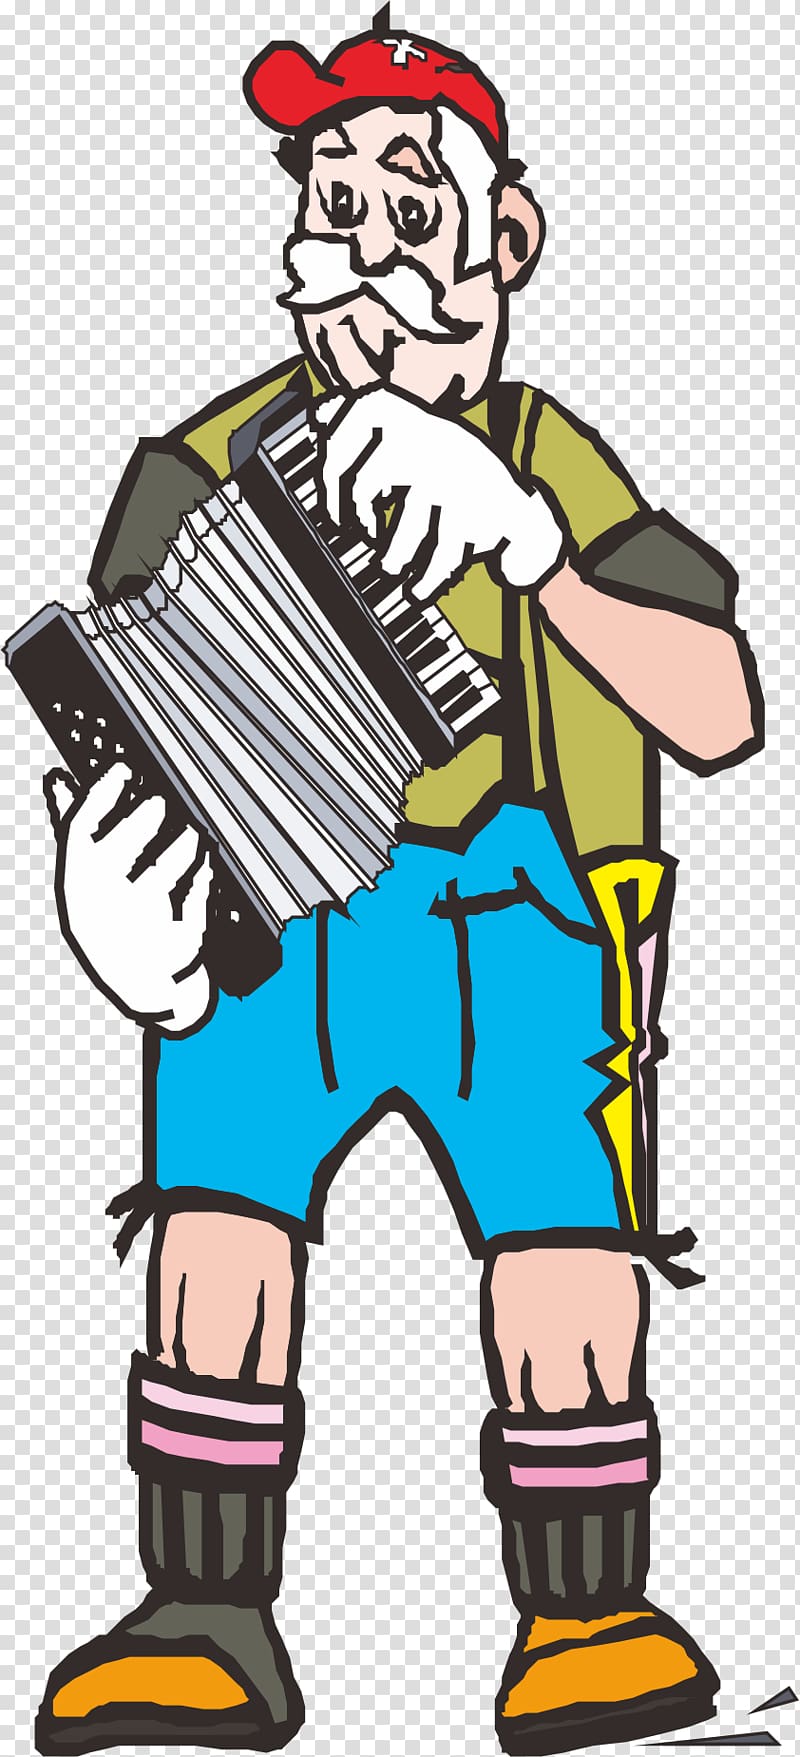 Accordion , The old man who plays the accordion transparent background PNG clipart